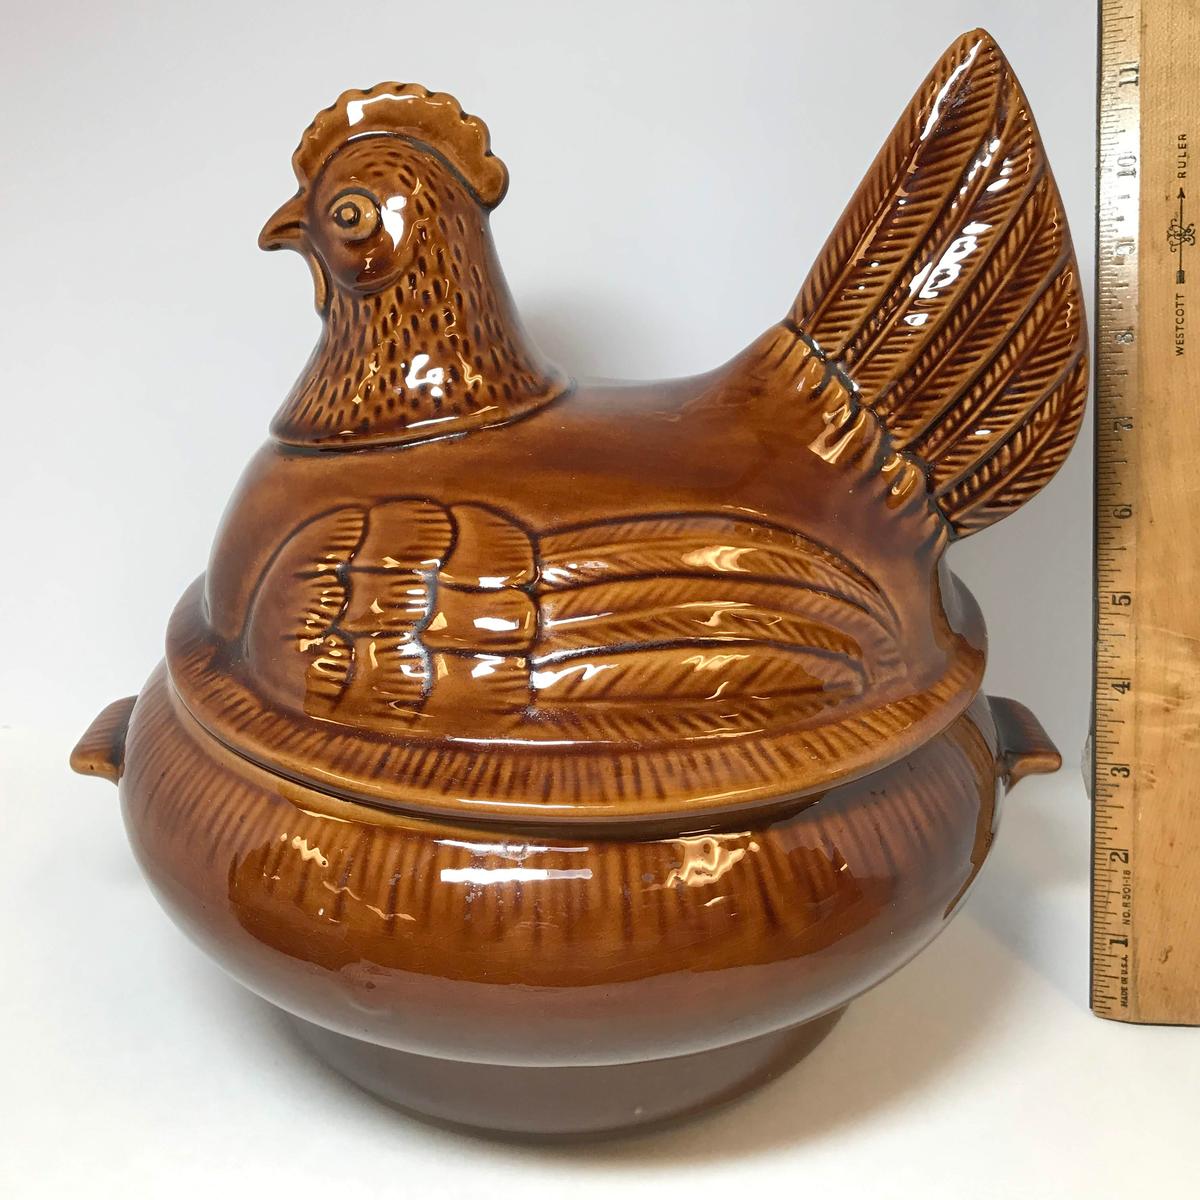 Large Vintage Ceramic Chicken Casserole Dish with Double Handles